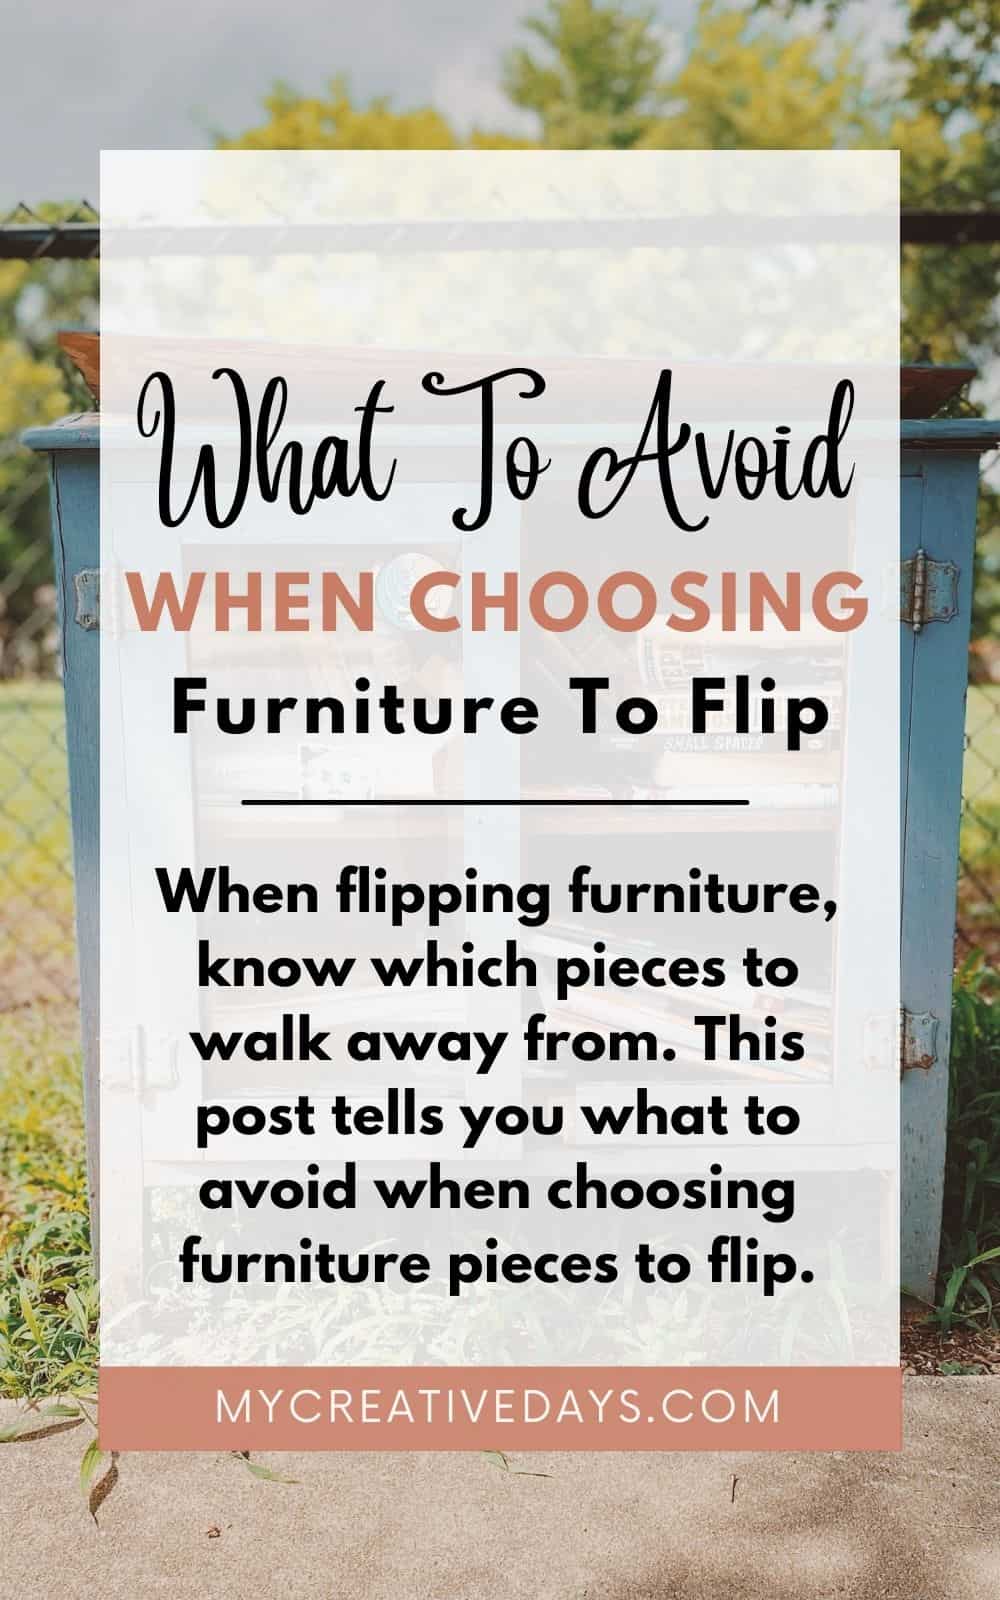 When flipping furniture, know which pieces to walk away from. This post tells you what to avoid when choosing furniture pieces to flip.